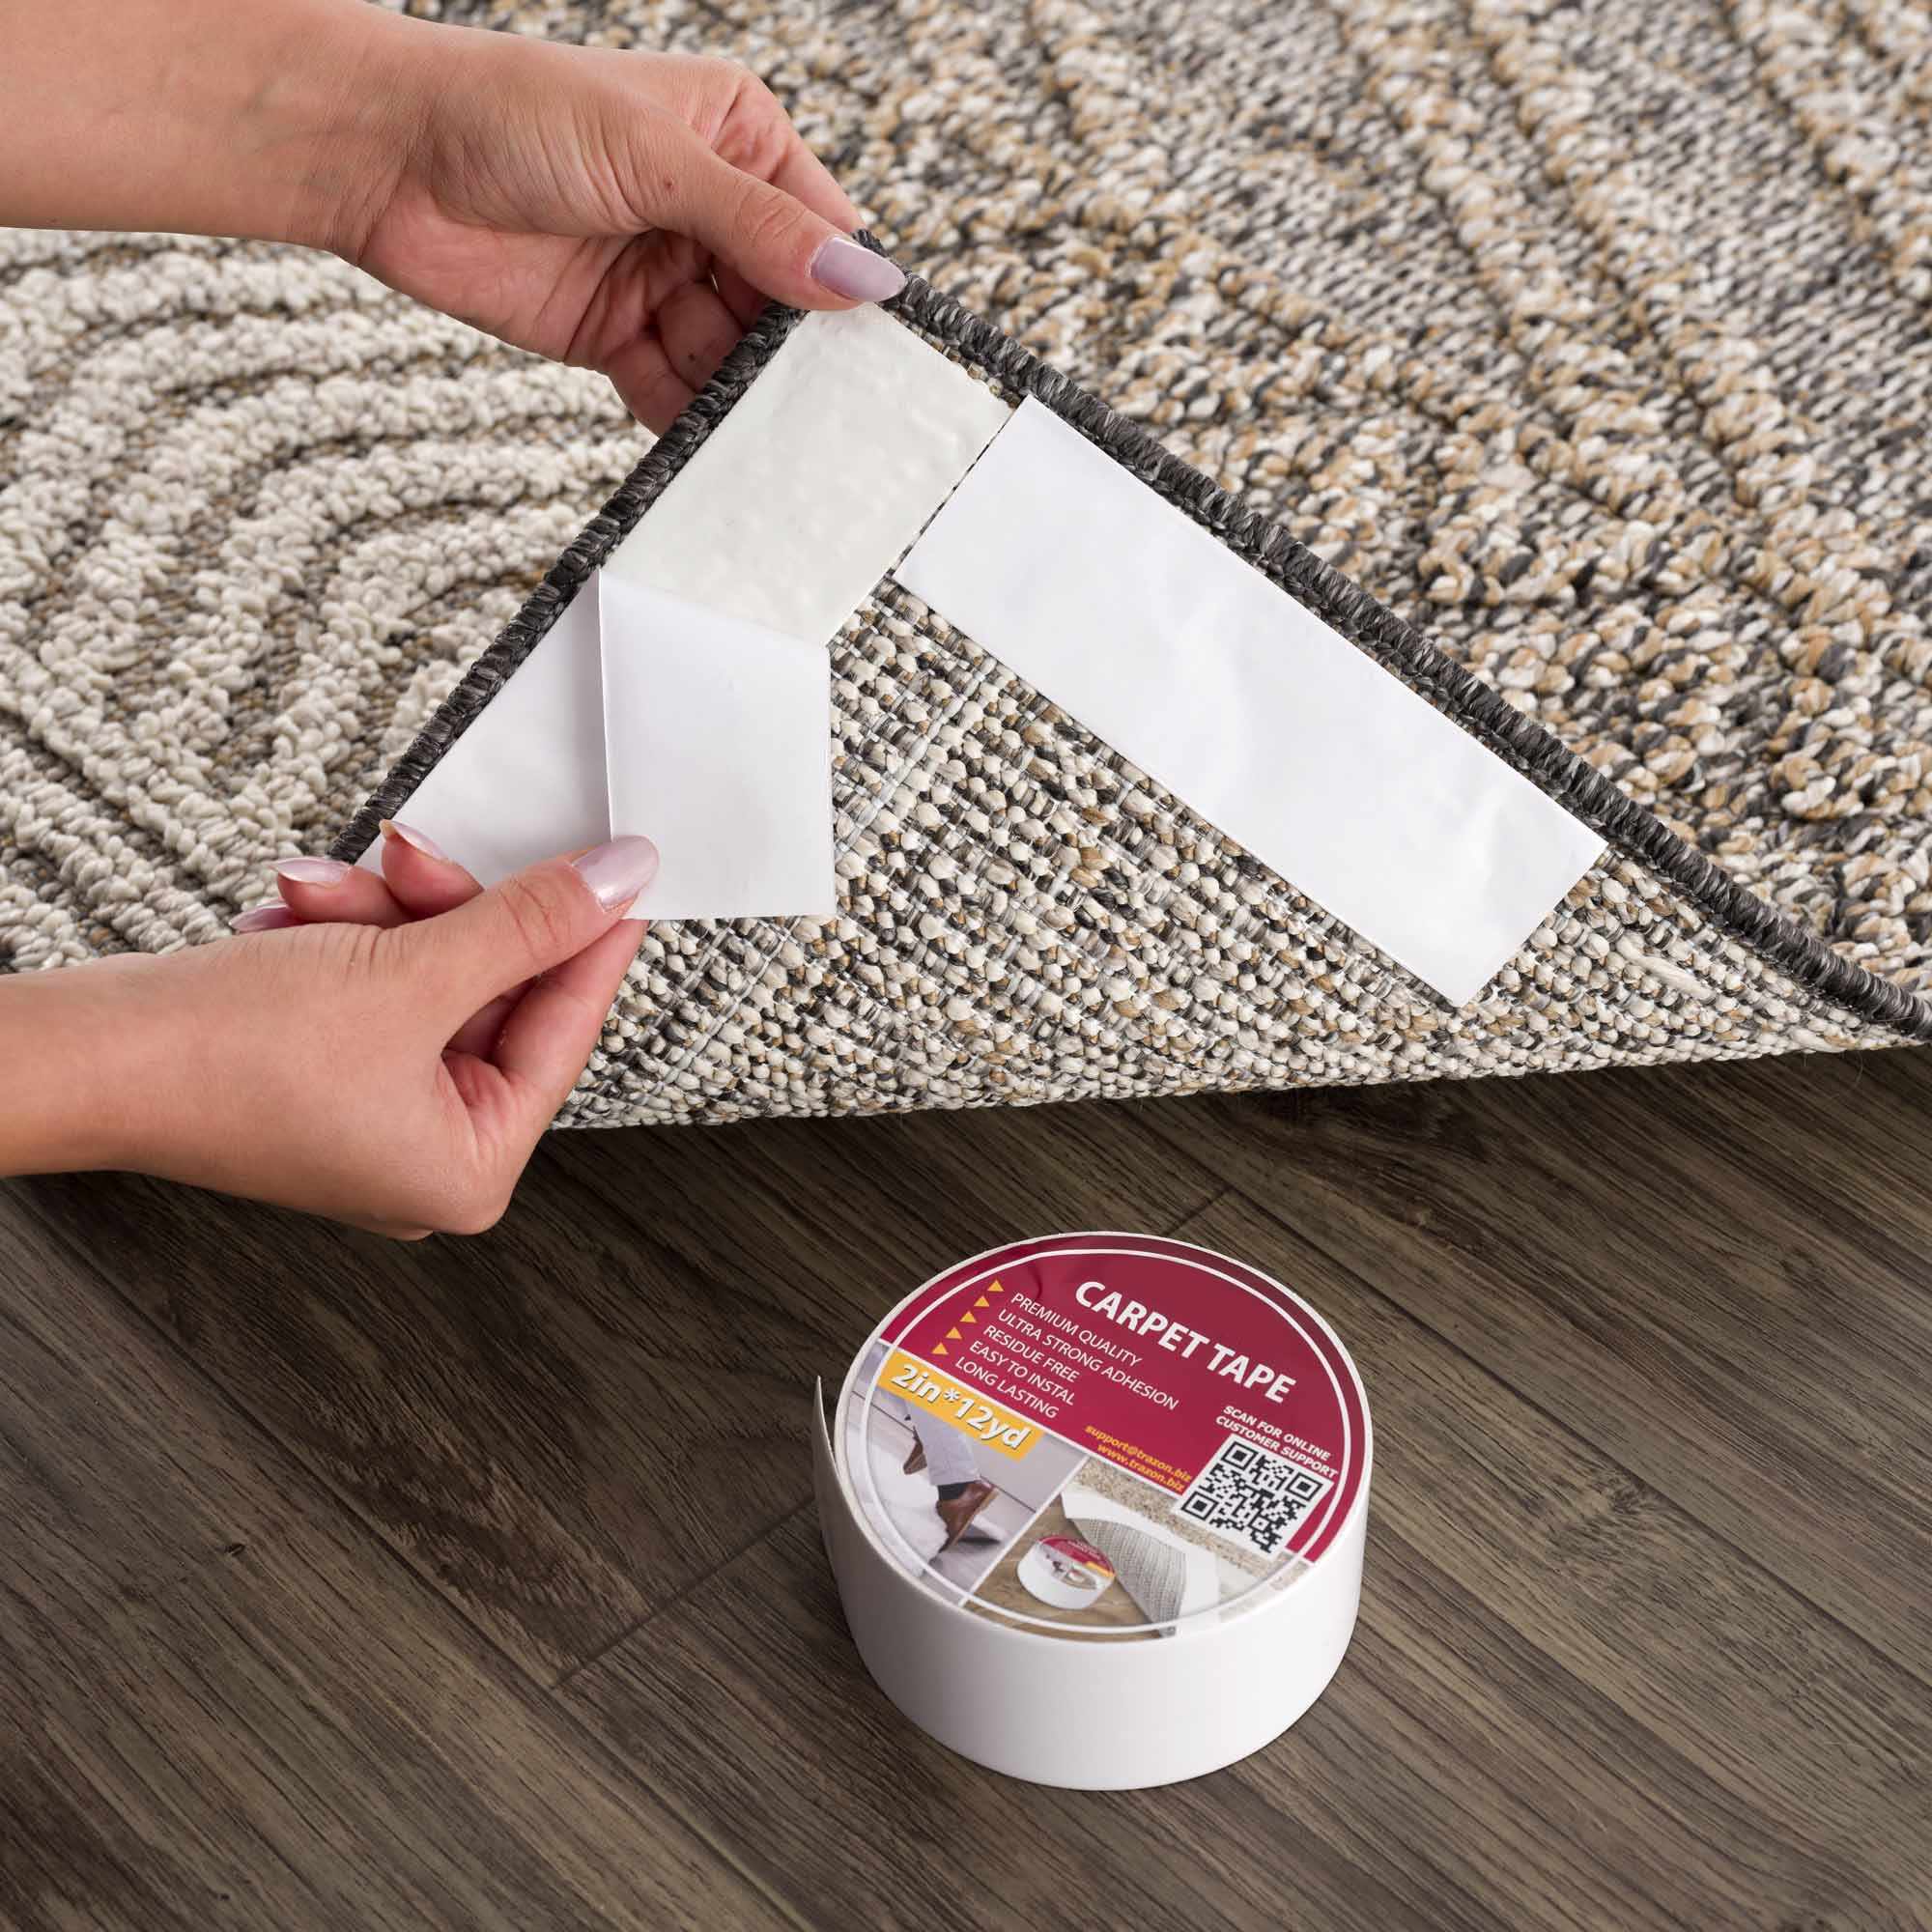 The Good Stuff Professional Strength Double Sided Rug Tape [2 x 60 Yards]  Stop Rugs Slipping